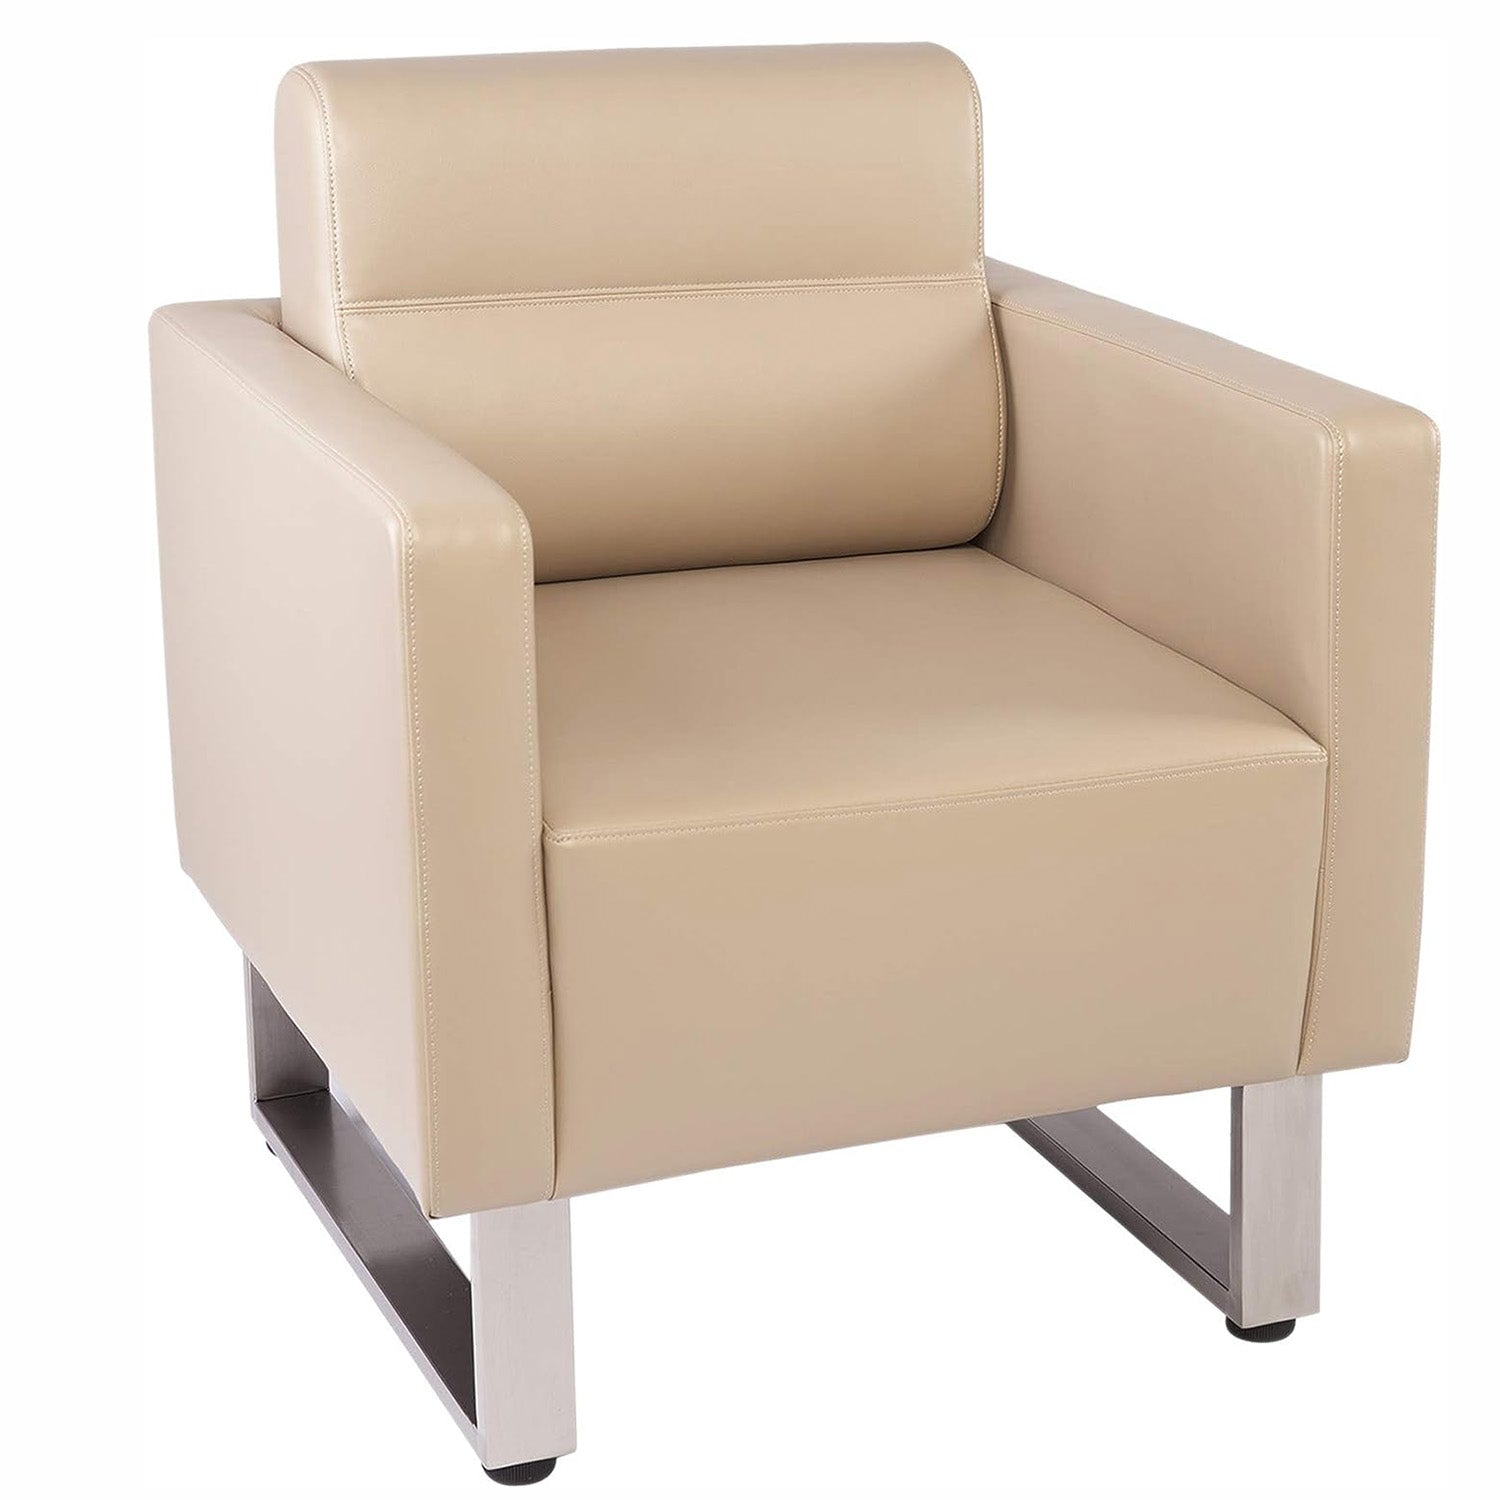 LUCKYERMORE Guest Chair Office Reception Chair Leather Sofa Chairs with PU Leather Soft Sponge, Beige